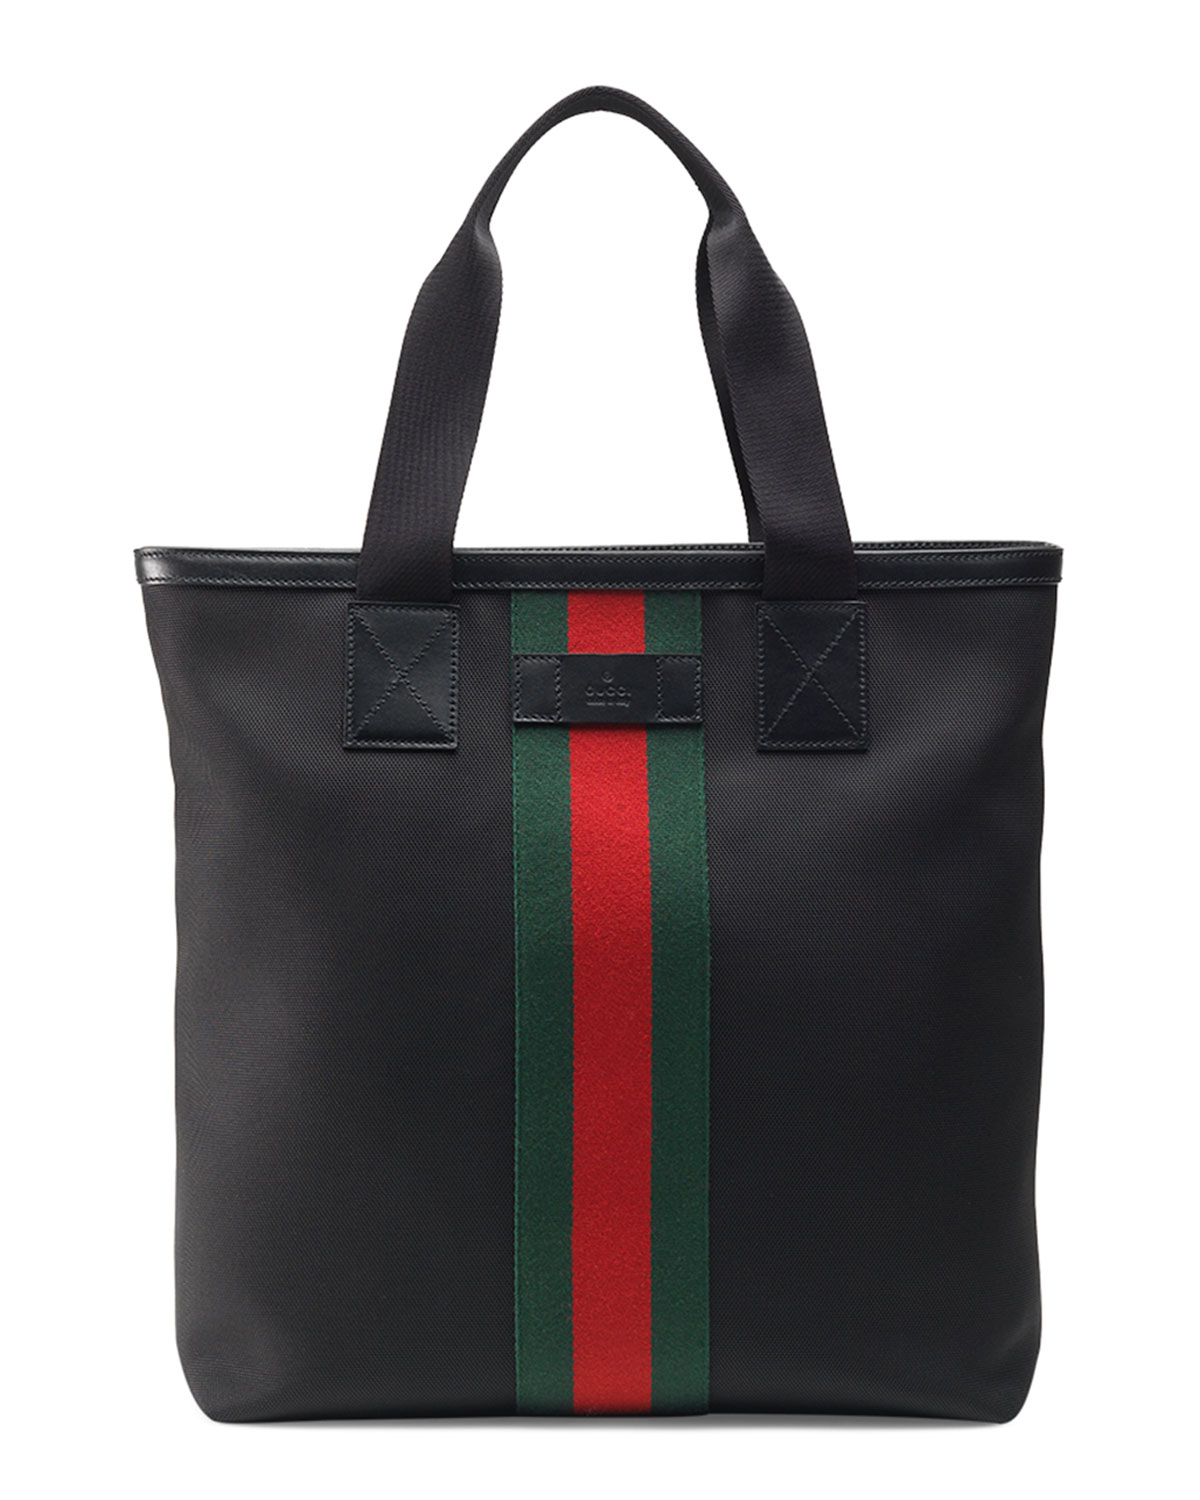 Gucci Web Band Canvas Tote in Black for Men - Lyst